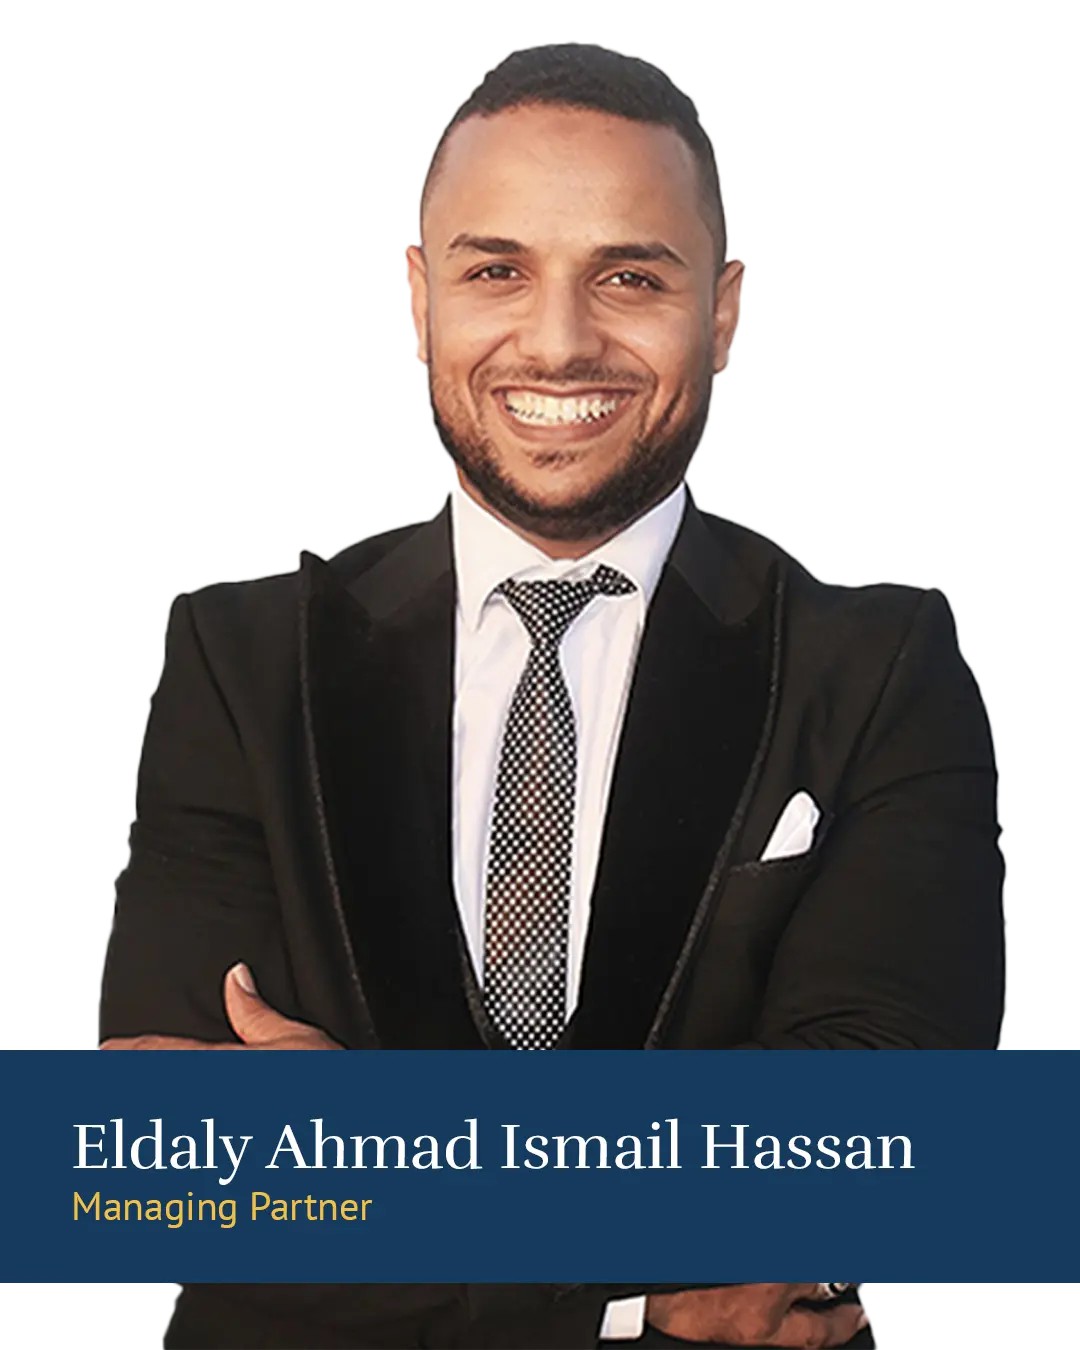 Mr. MD Eldaly Ahmad Ismail Hassan